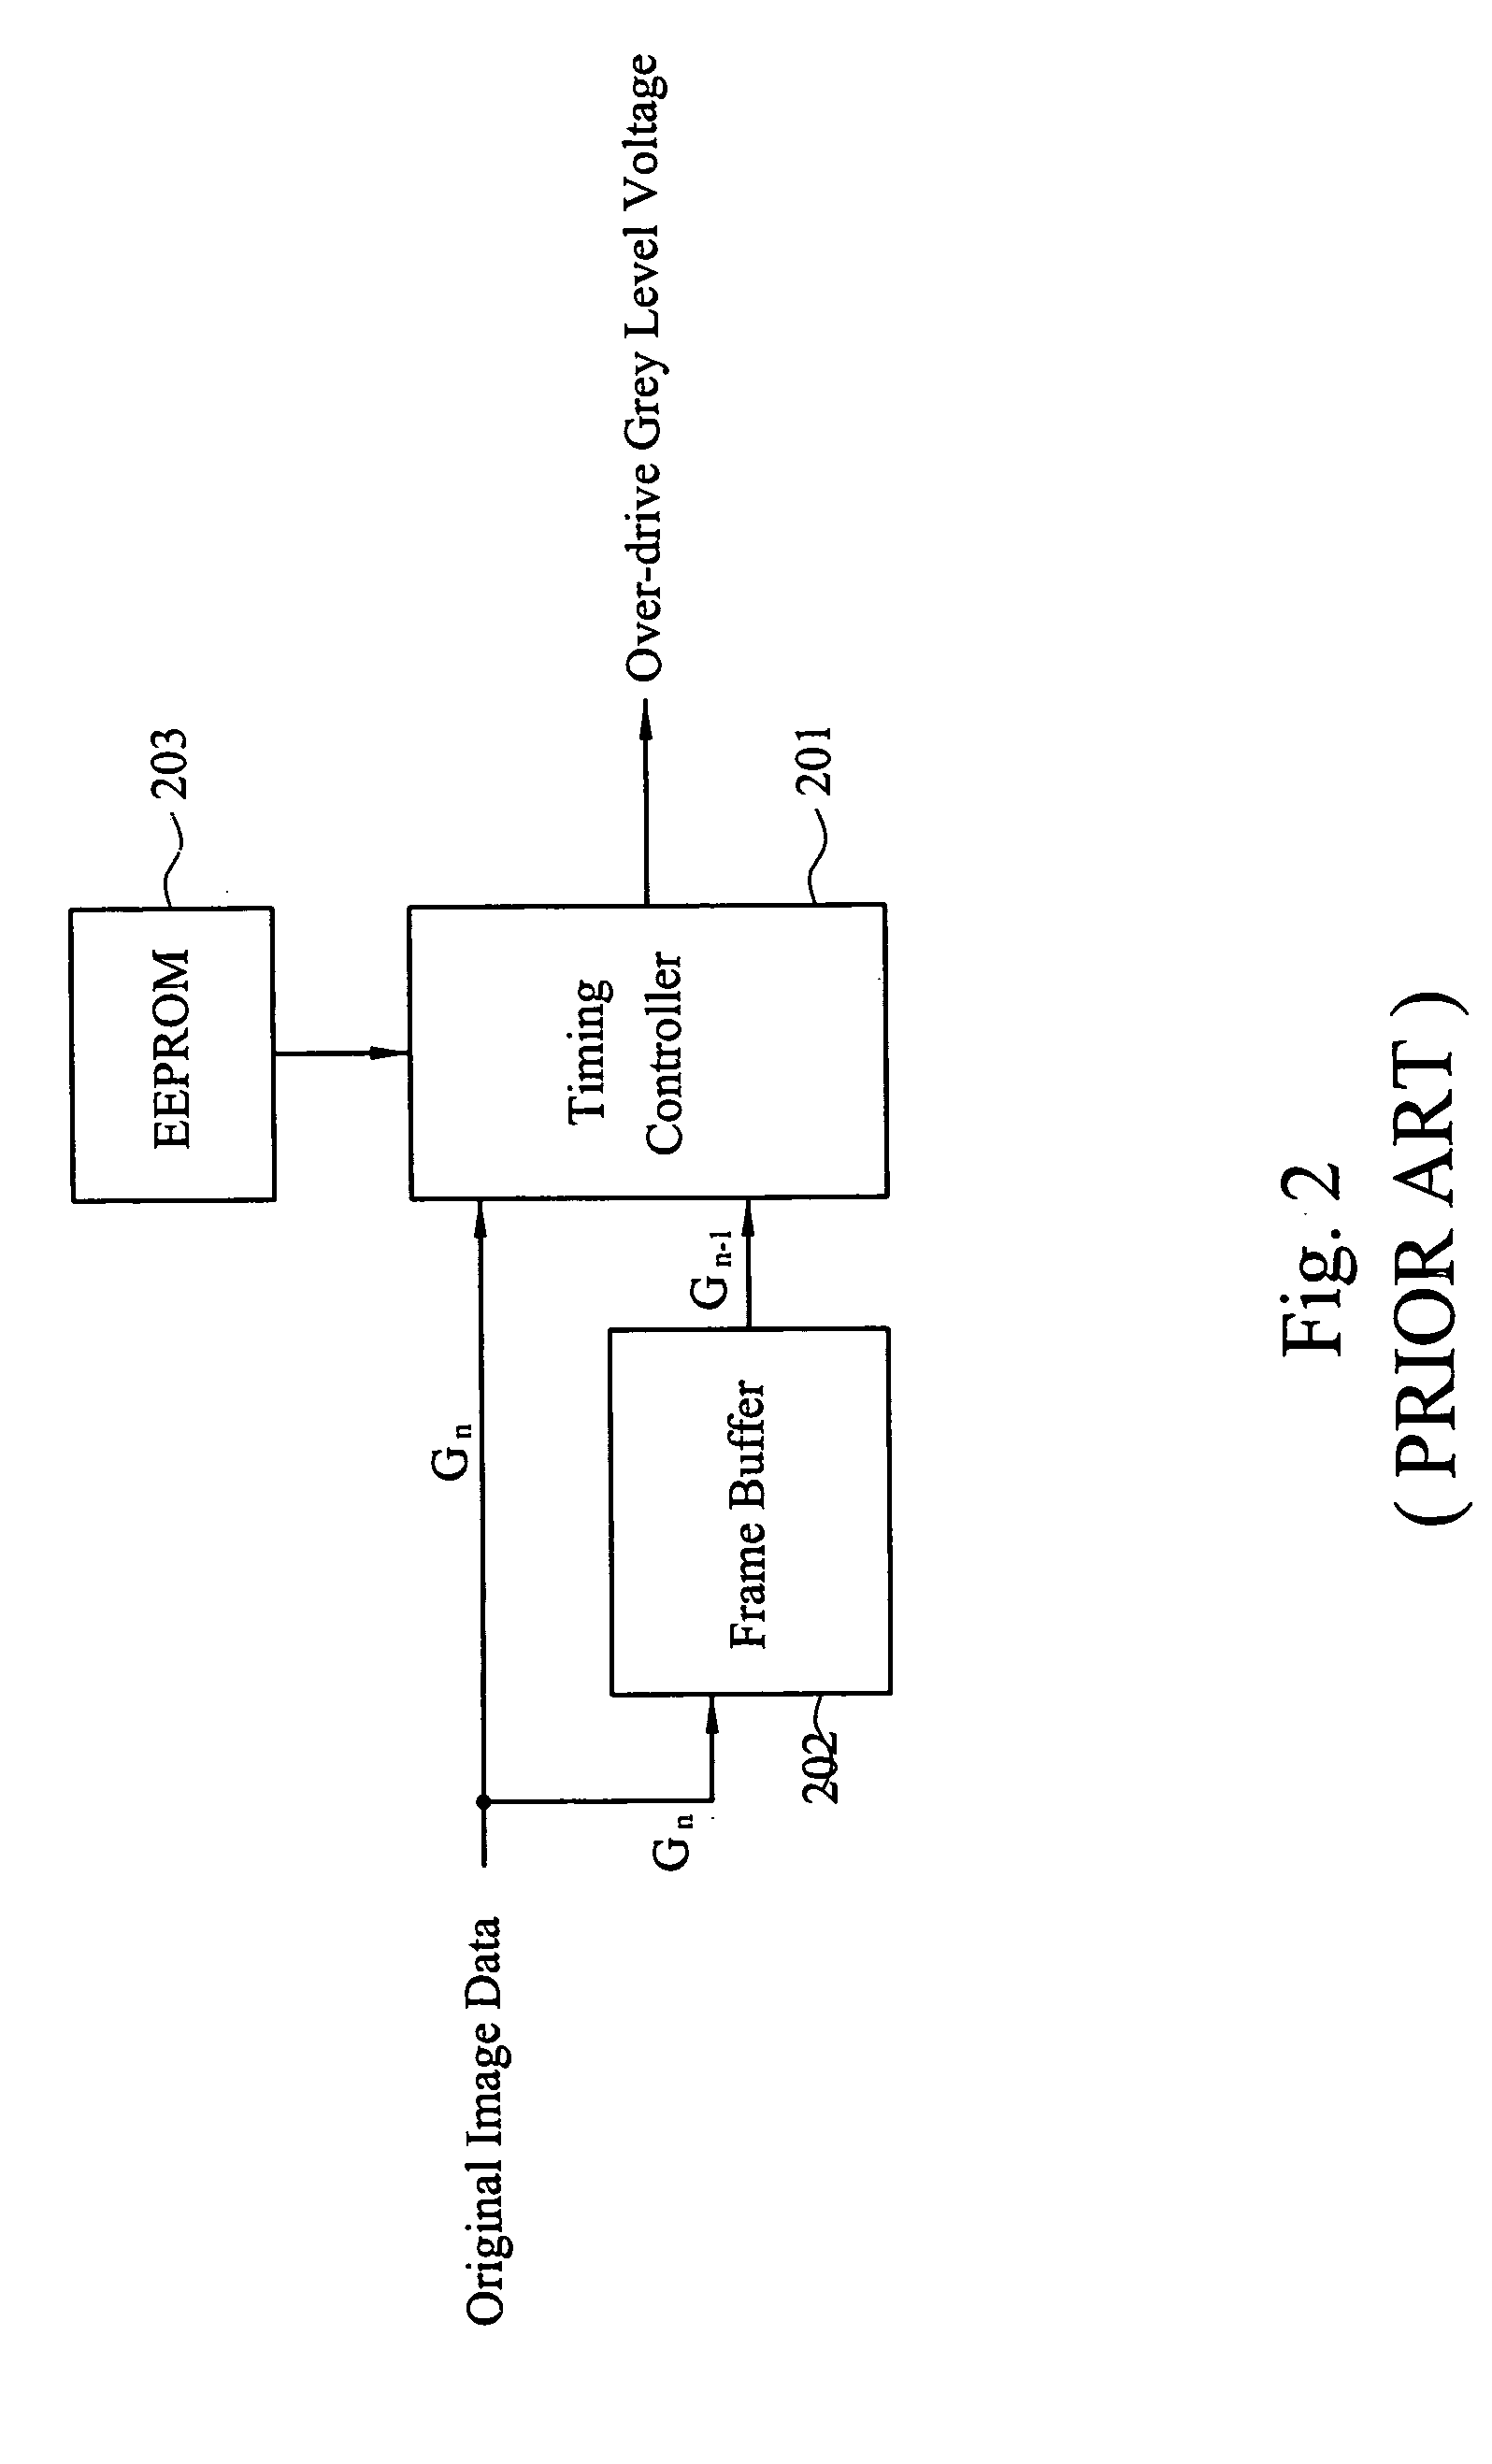 Driving system and driving method for motion pictures